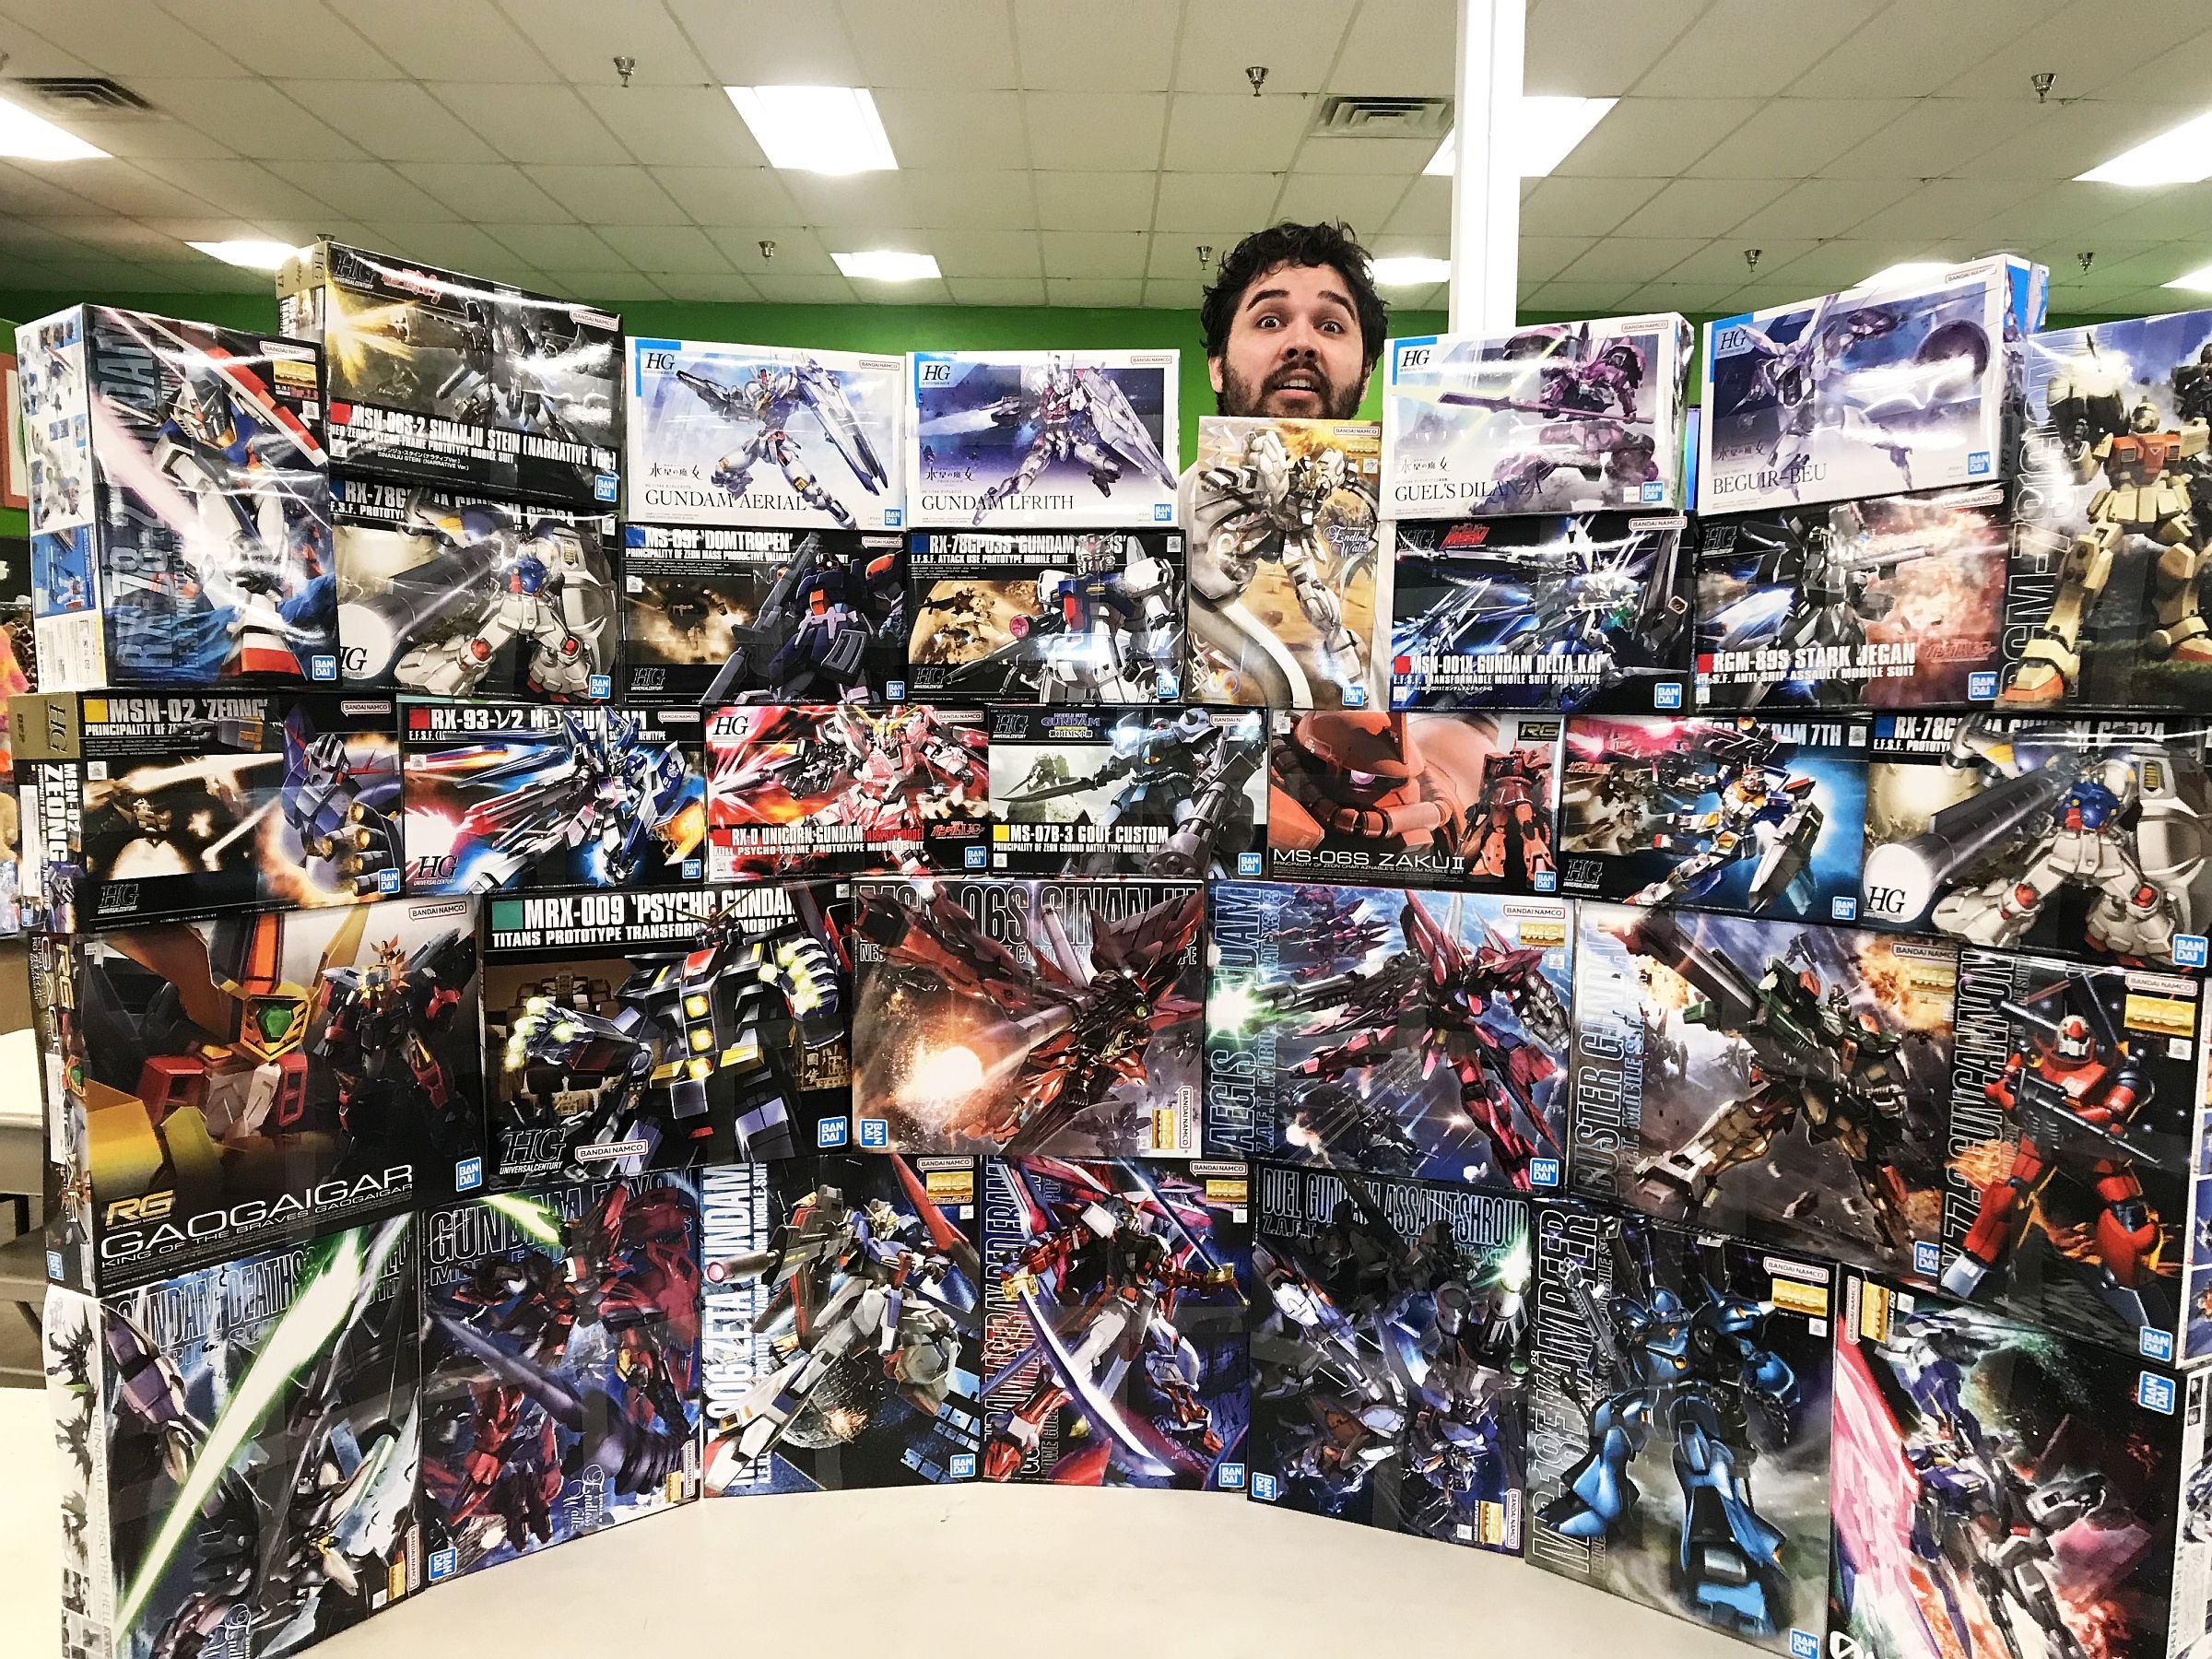 Wall of Gundam unopened Gundam boxes stacked into a wall shape with a man peeking out from behind it